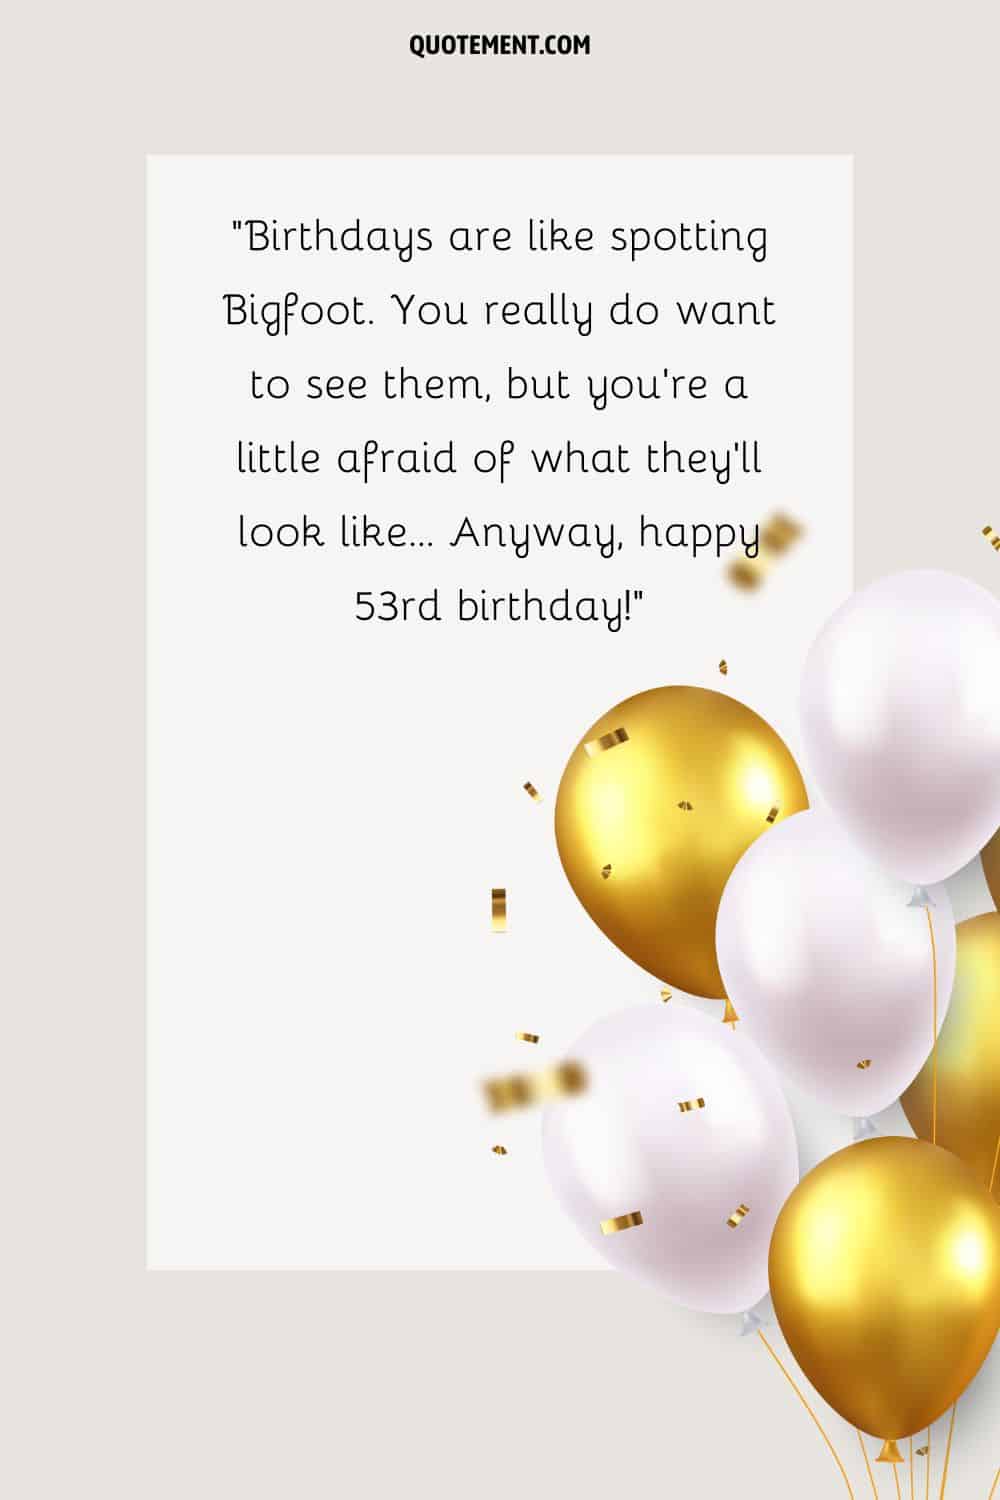 Hilarious message for their 53rd birthday, white and golden balloons and confetti